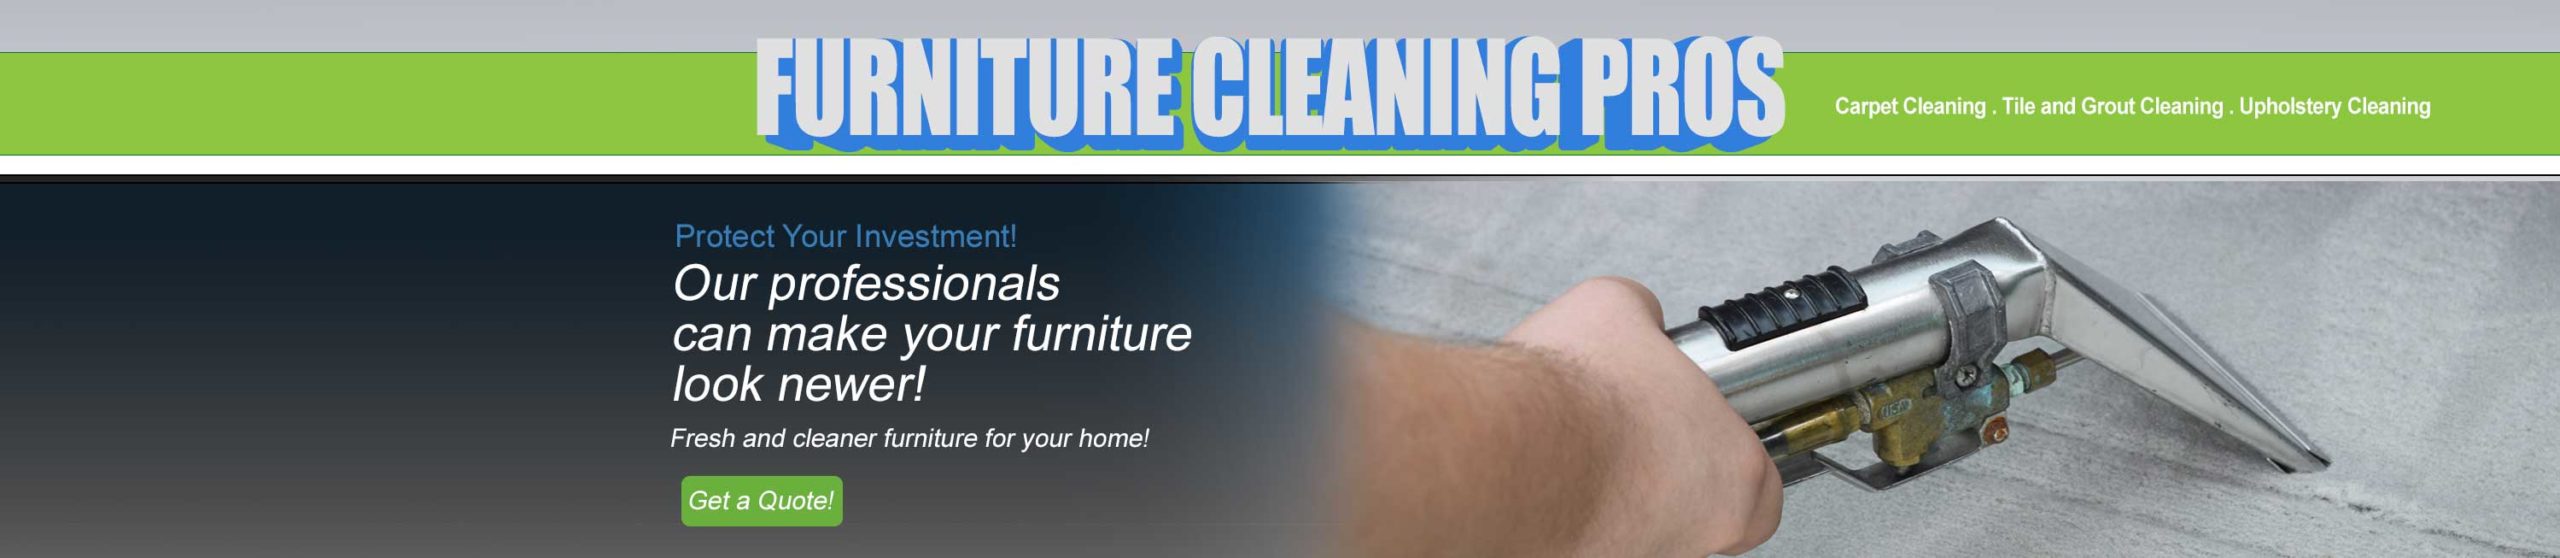 Furniture and upholstery cleaning in Sun City AZ